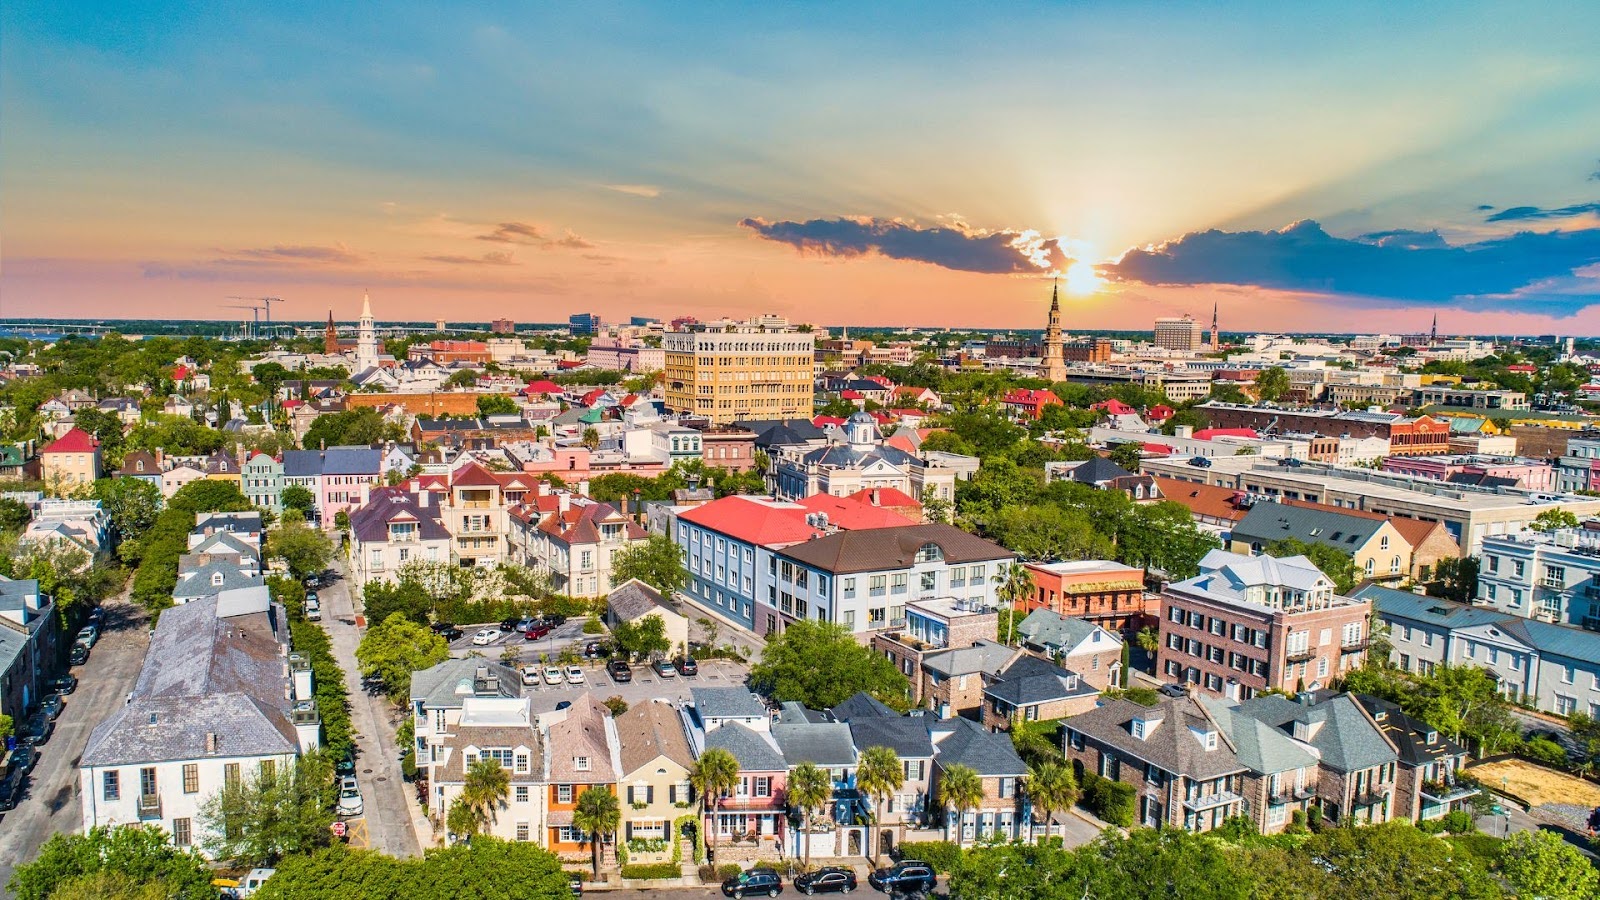 Best Vacation Spots for Couples - Charleston SC